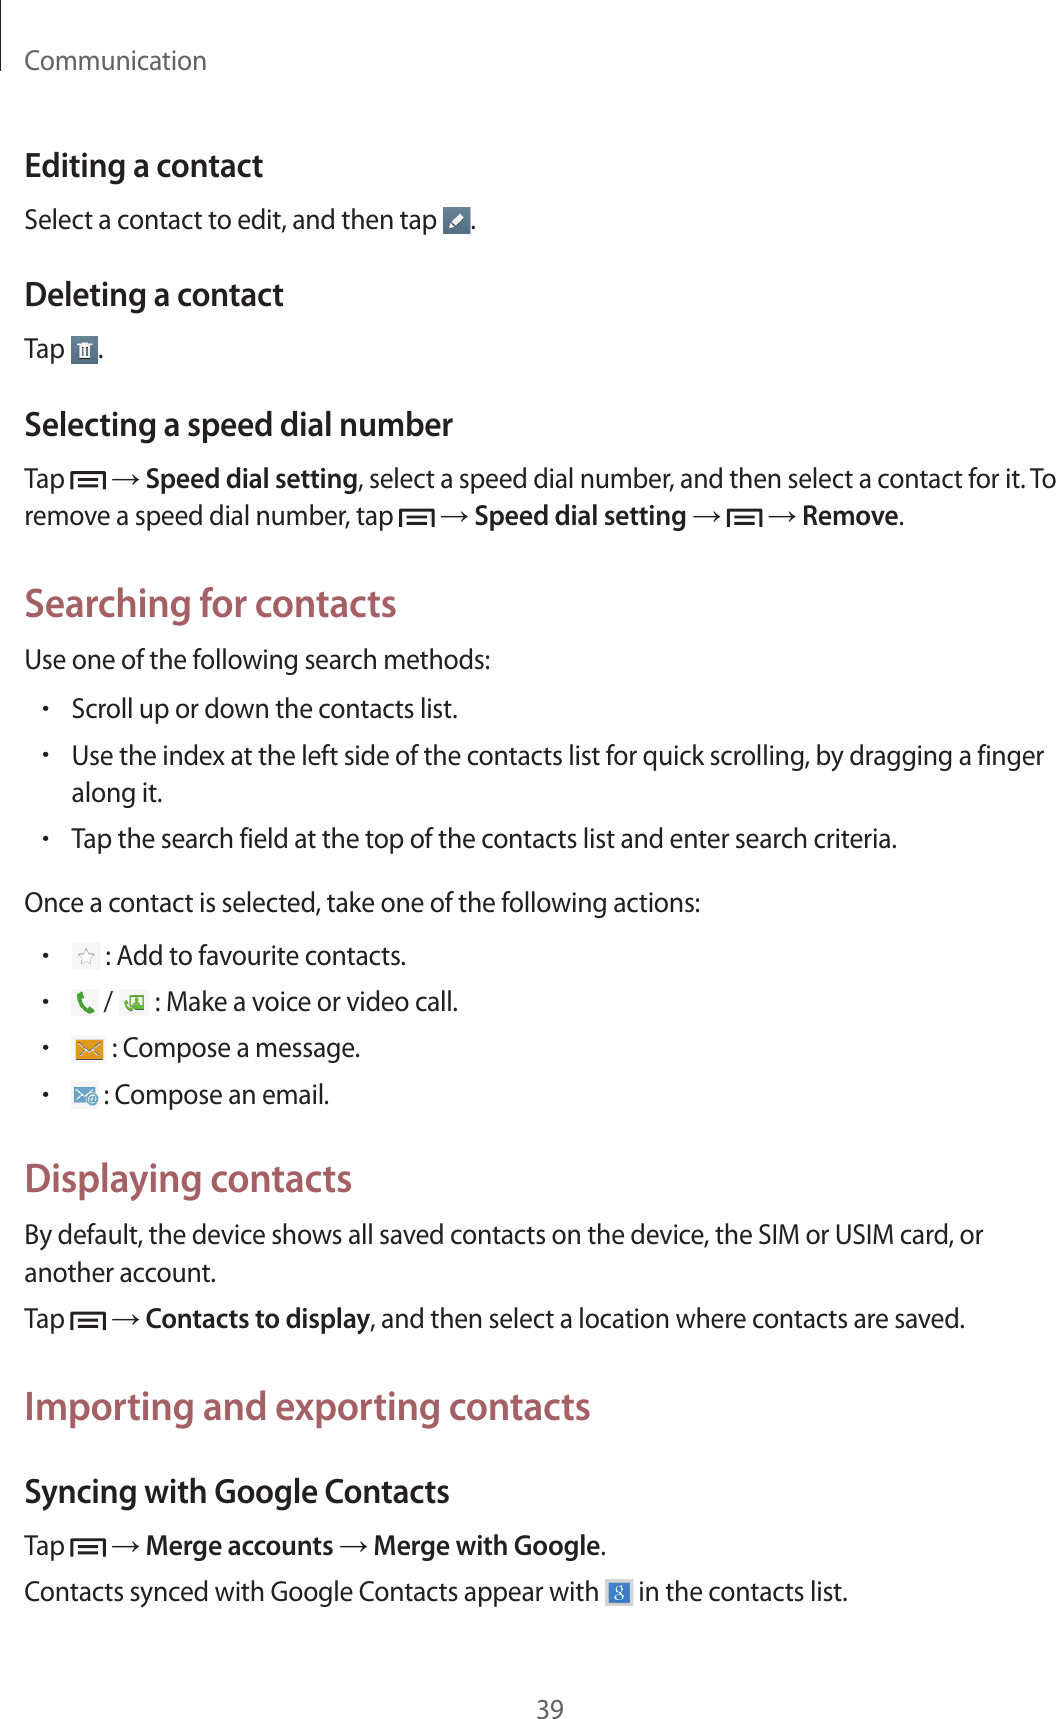 Communication39Editing a contactSelect a contact to edit, and then tap  .Deleting a contactTap  .Selecting a speed dial numberTap   → Speed dial setting, select a speed dial number, and then select a contact for it. To remove a speed dial number, tap   → Speed dial setting →   → Remove.Searching for contactsUse one of the following search methods:• Scroll up or down the contacts list.• Use the index at the left side of the contacts list for quick scrolling, by dragging a finger along it.• Tap the search field at the top of the contacts list and enter search criteria.Once a contact is selected, take one of the following actions:•  : Add to favourite contacts.•  /   : Make a voice or video call.•  : Compose a message.•  : Compose an email.Displaying contactsBy default, the device shows all saved contacts on the device, the SIM or USIM card, or another account.Tap   → Contacts to display, and then select a location where contacts are saved.Importing and exporting contactsSyncing with Google ContactsTap   → Merge accounts → Merge with Google.Contacts synced with Google Contacts appear with   in the contacts list.